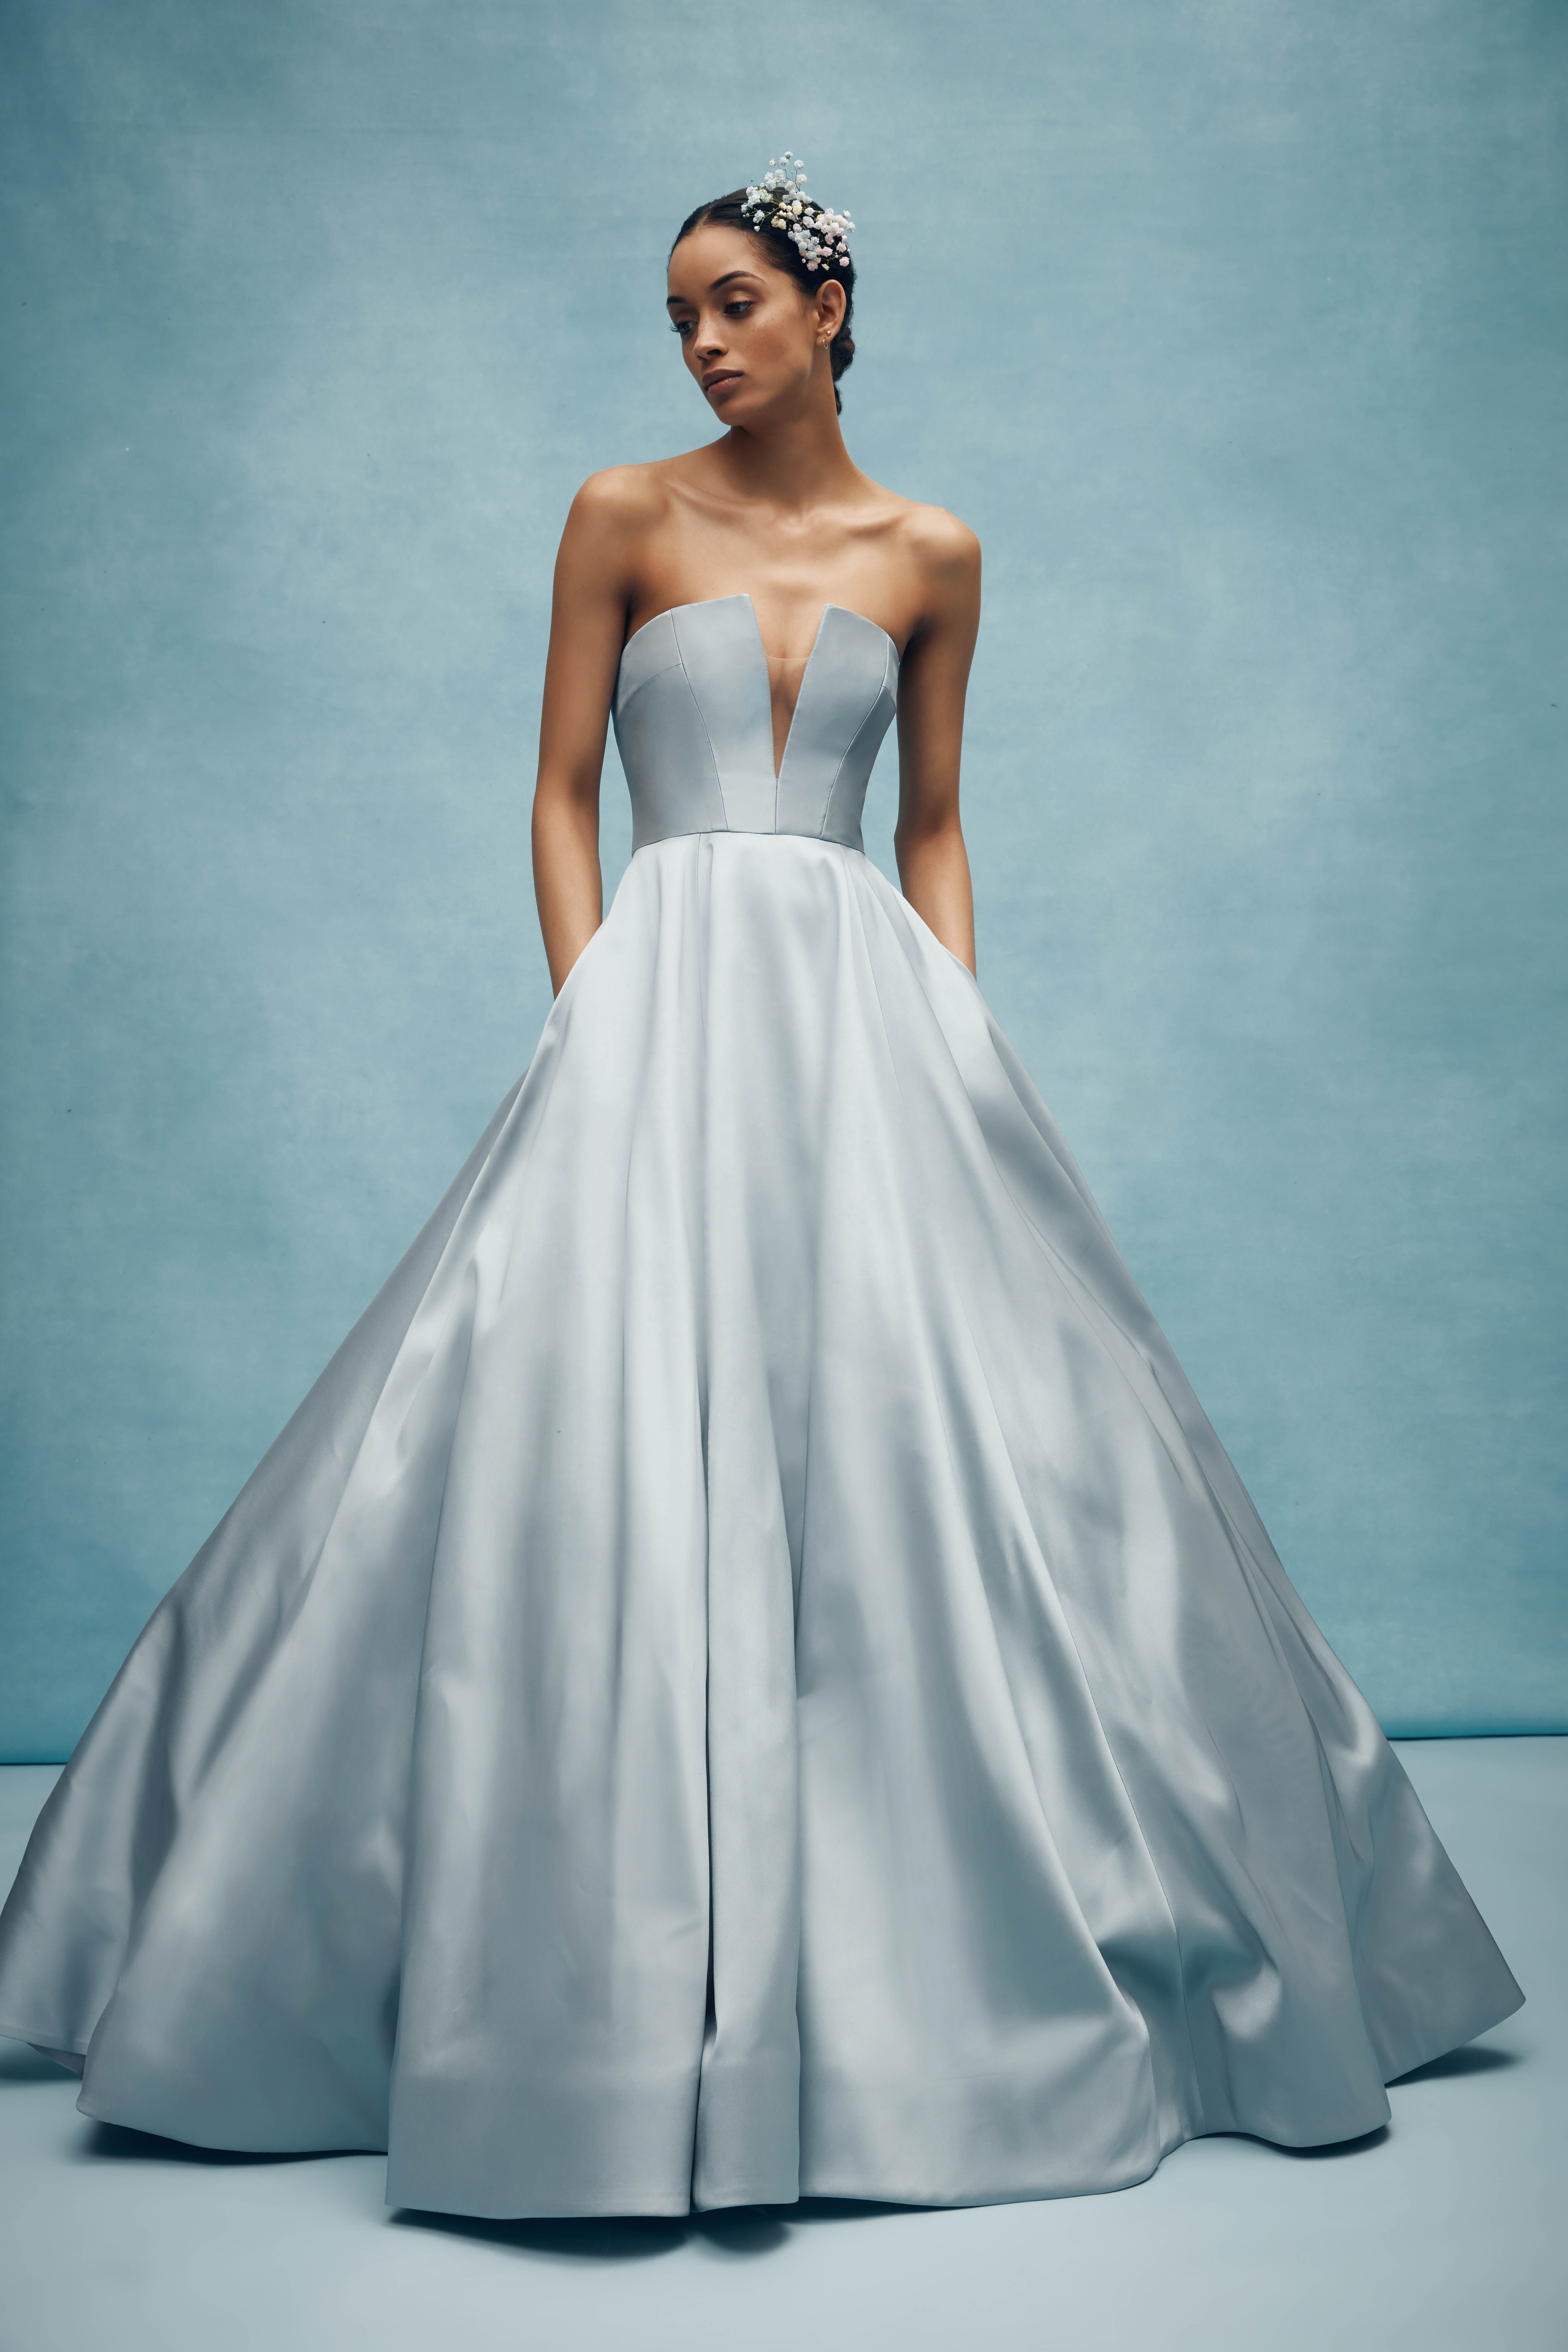 Colorful Wedding Dresses That Make a Statement Down the ...